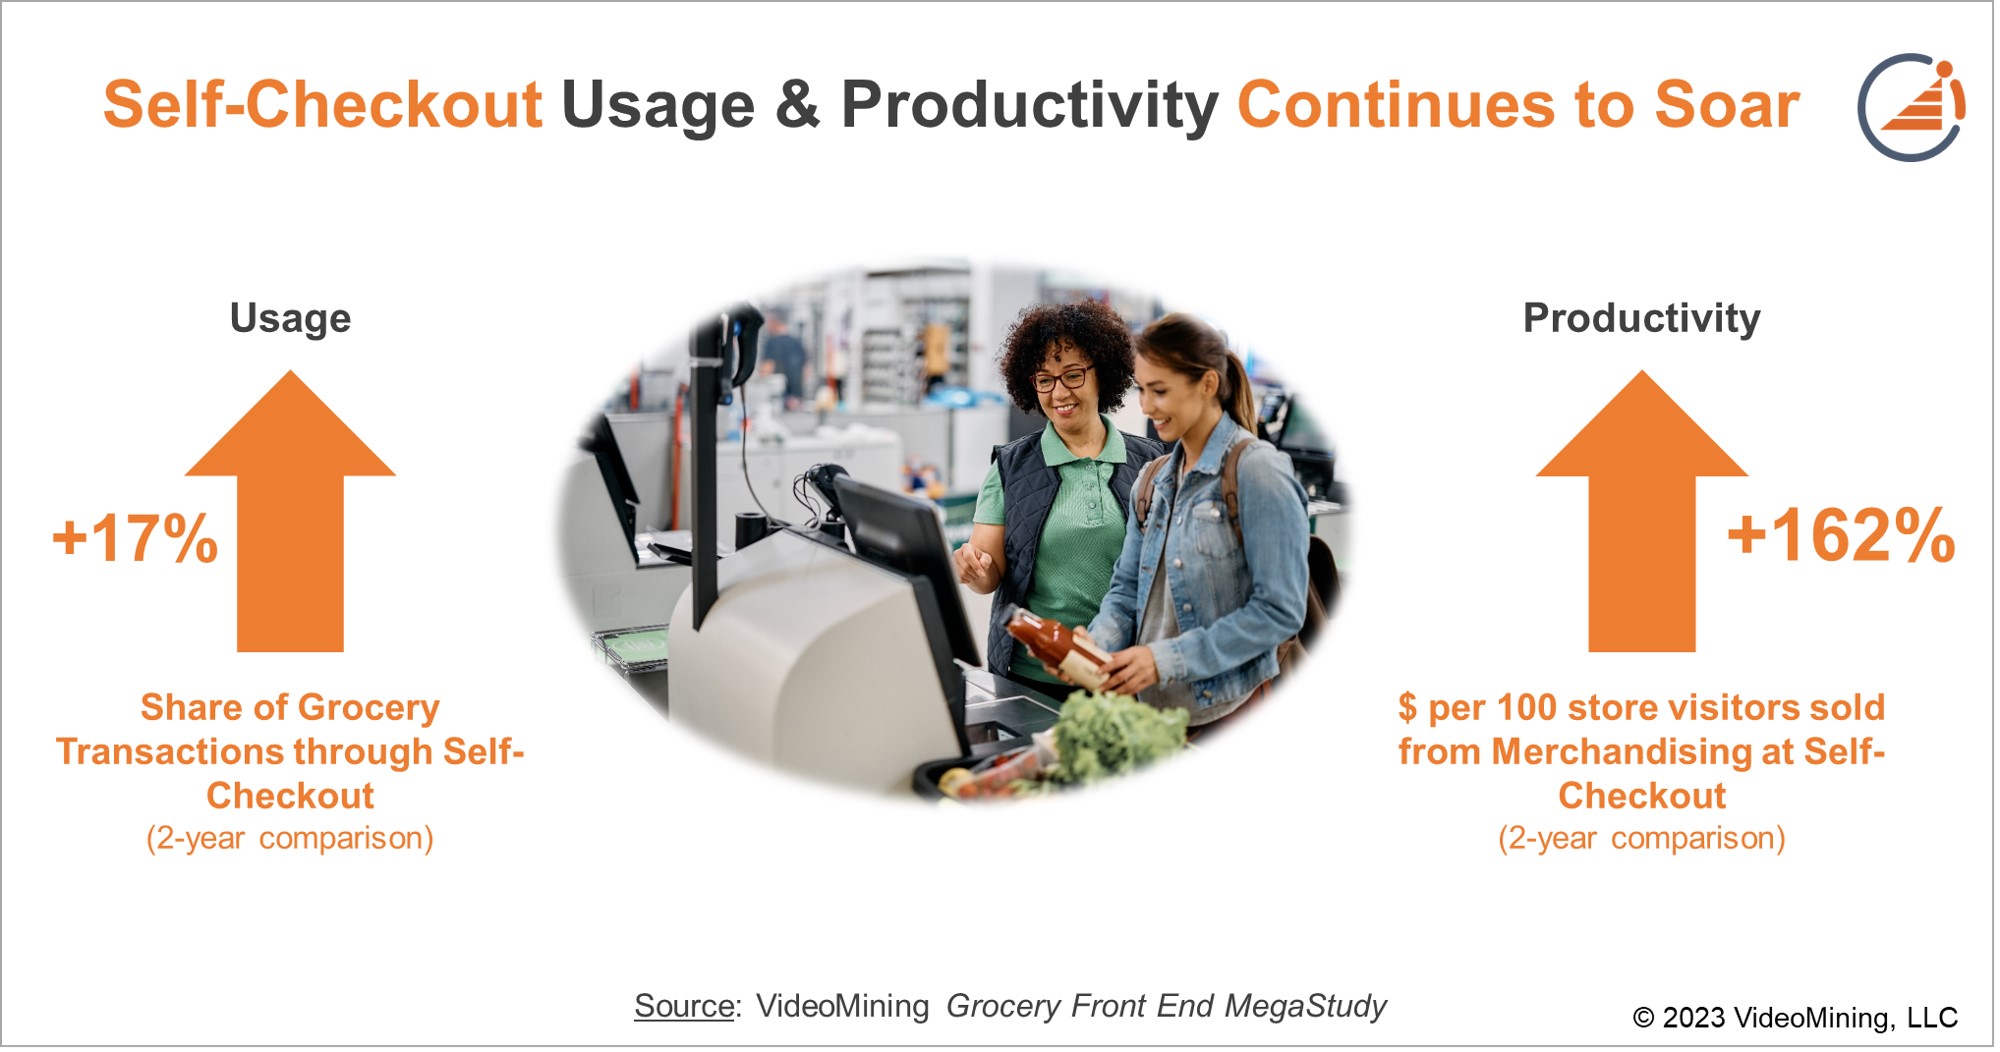 Self-Checkout Usage & Productivity Continues to Soar in Grocery